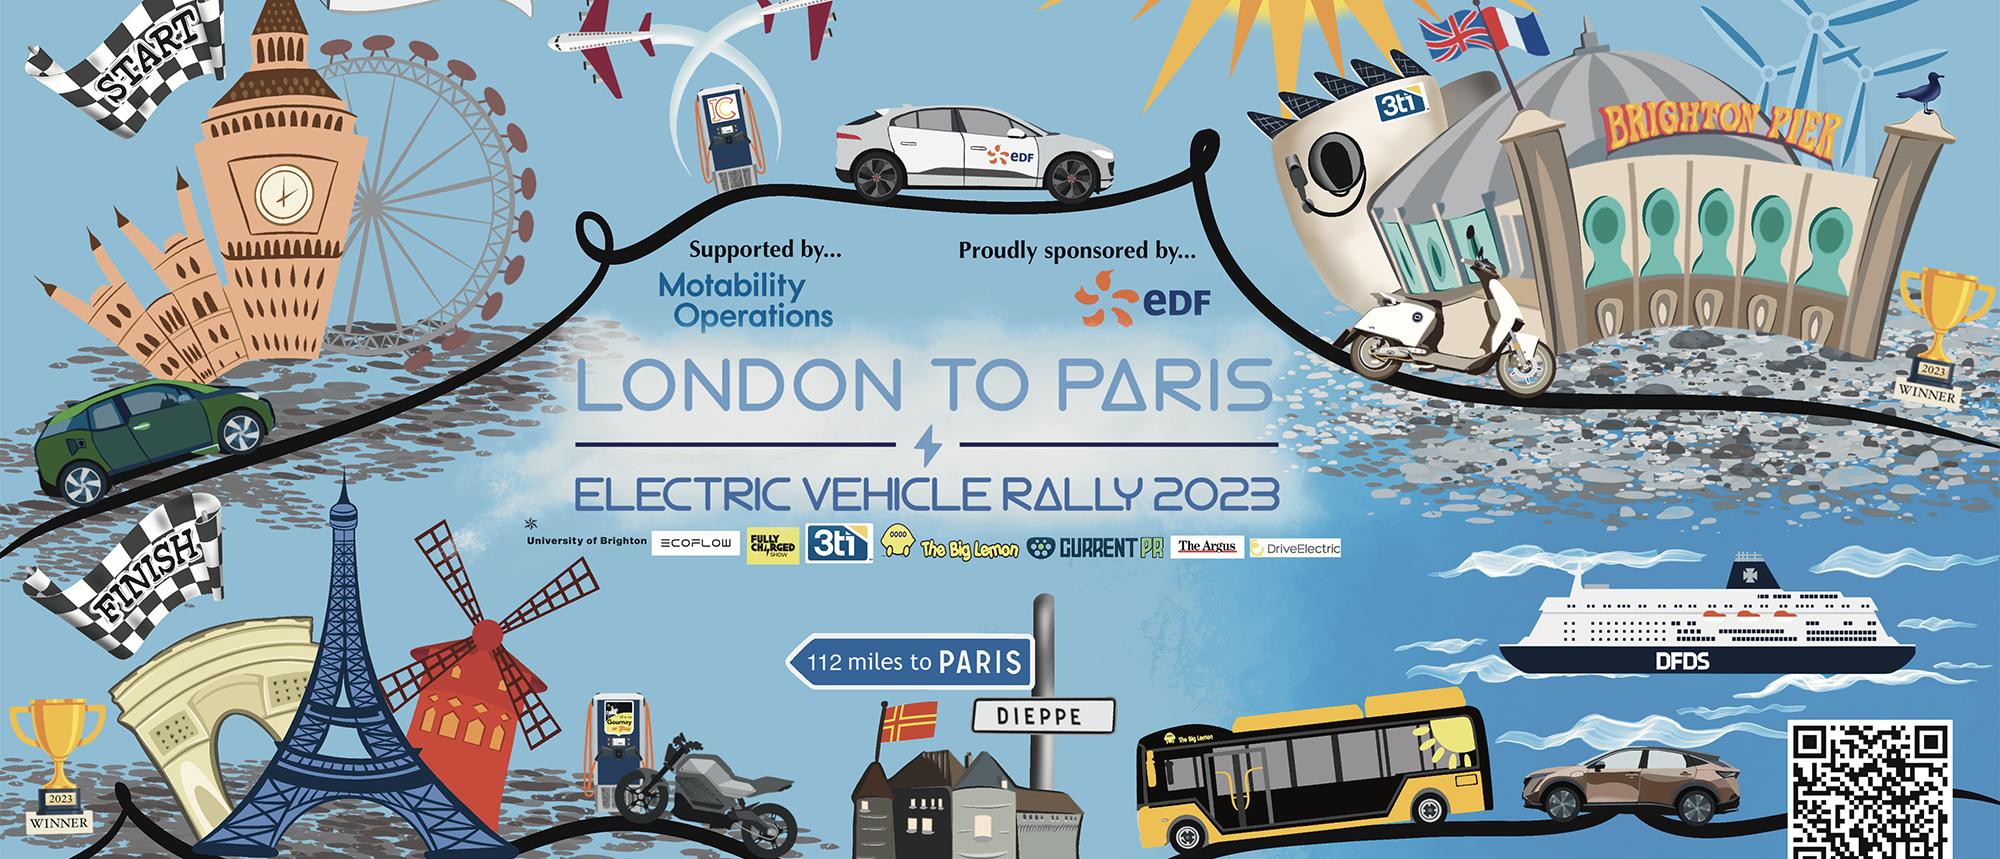 Banner for London to Paris EV Rally 2023, depicting electric vehicles and landmarks